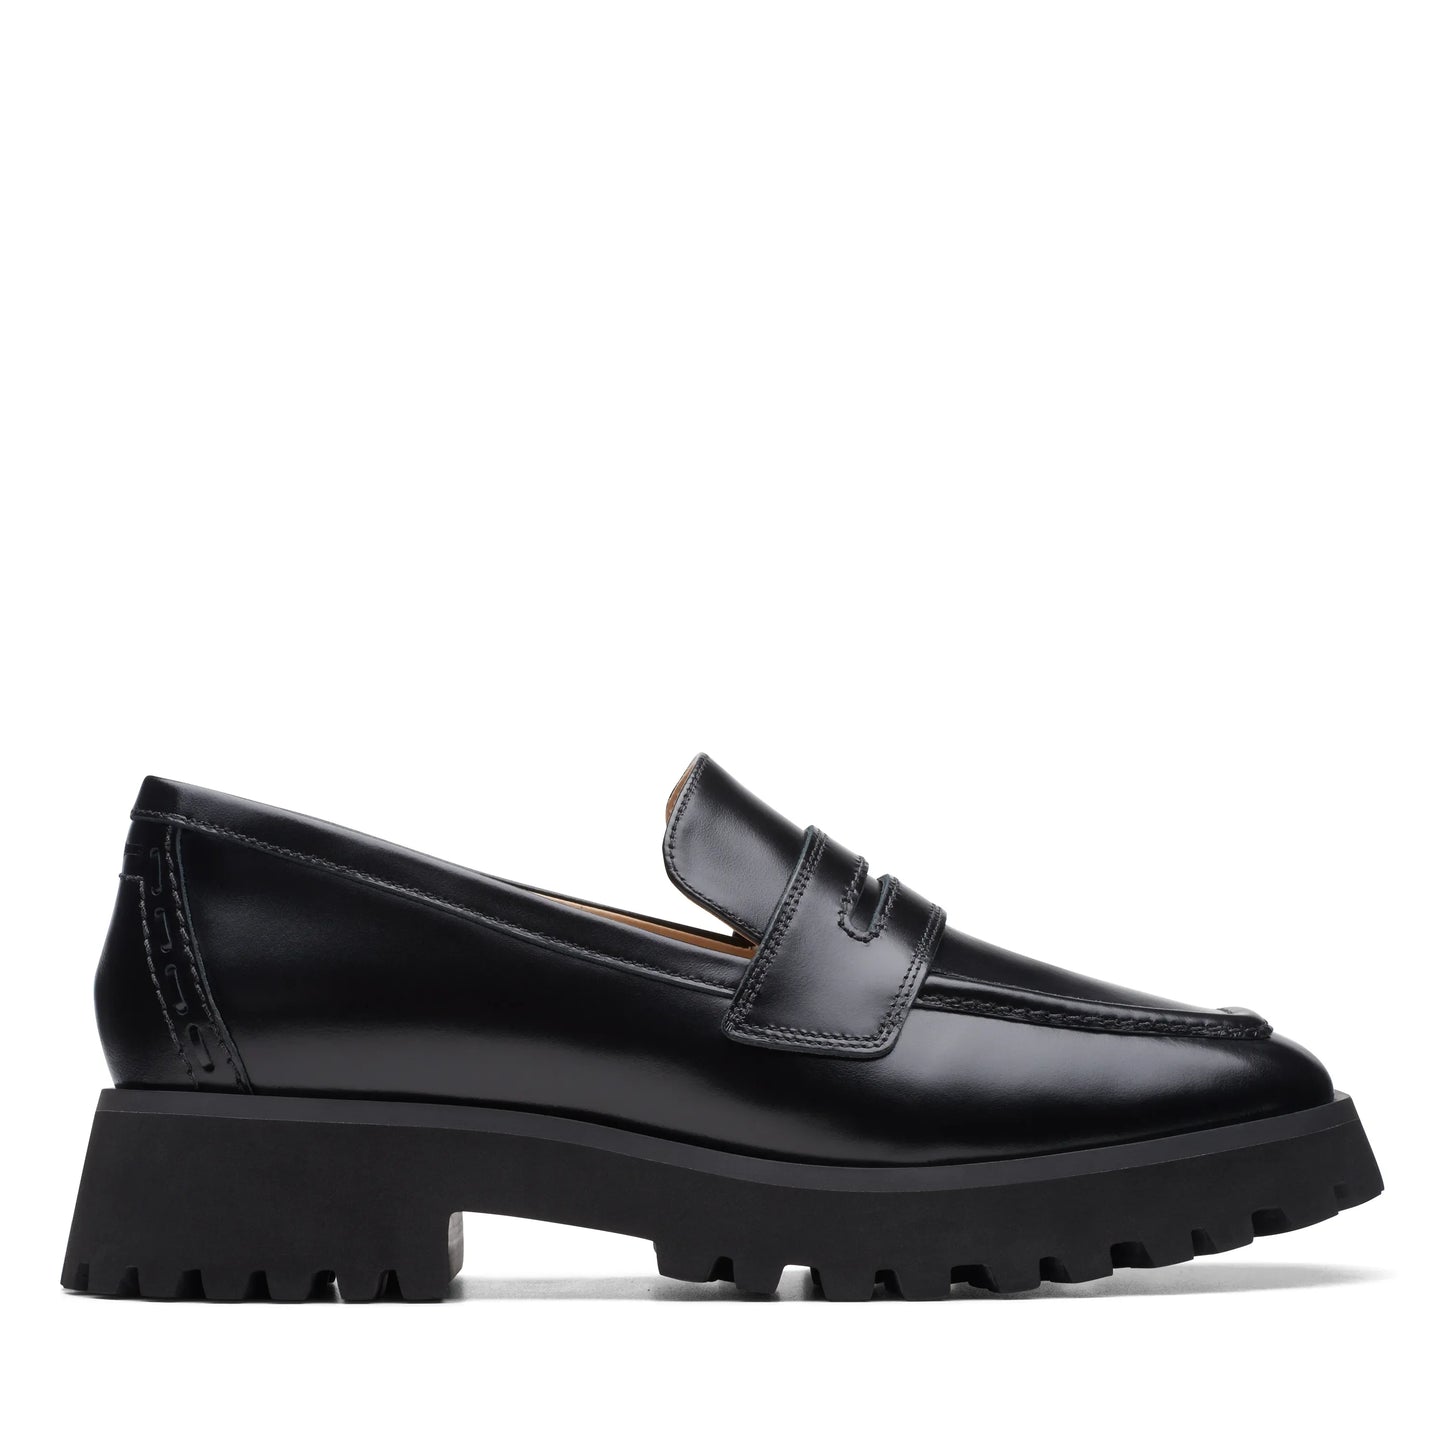 CLARKS | MOCASINES MUJER | STAYSO EDGE BLACK LEATHER | NEGRO